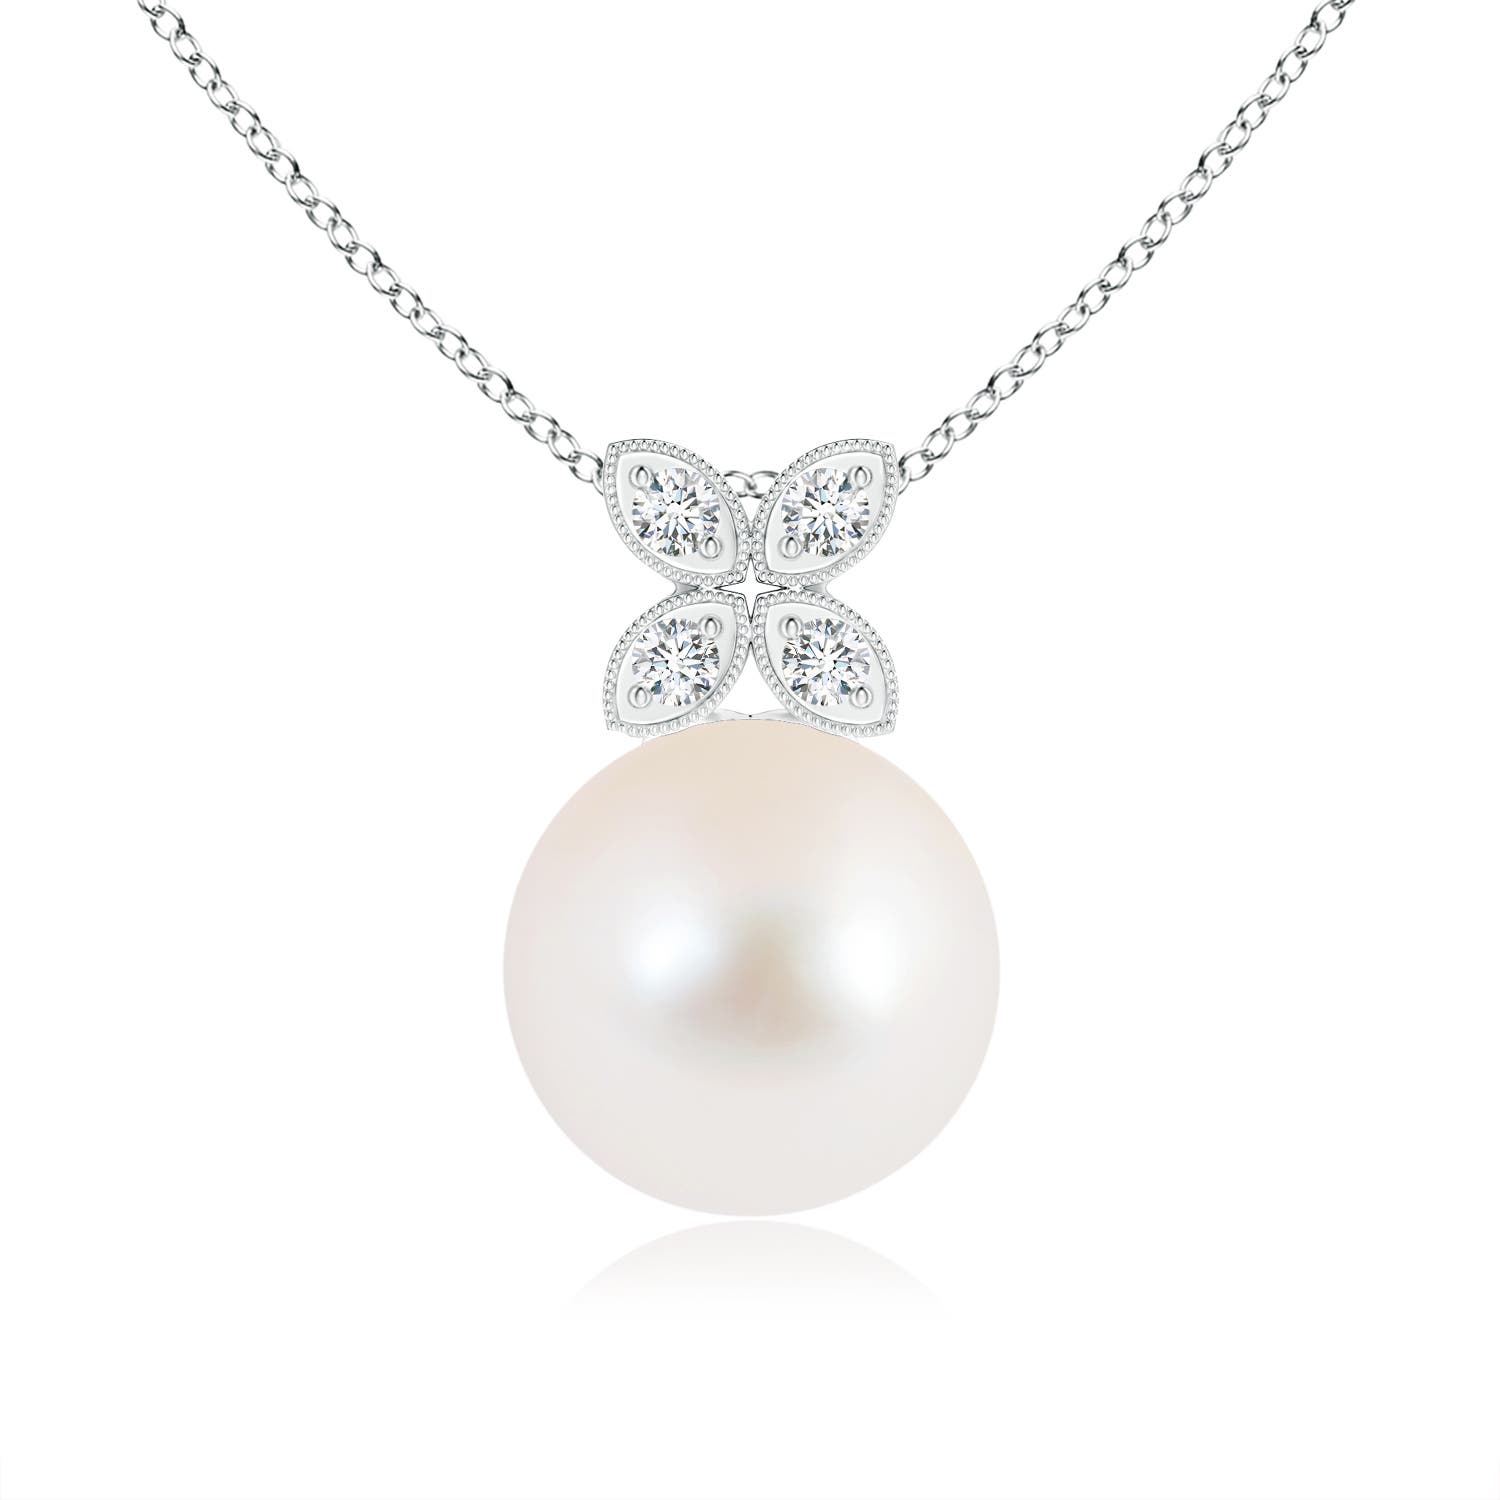 AAA - Freshwater Cultured Pearl / 5.32 CT / 14 KT White Gold